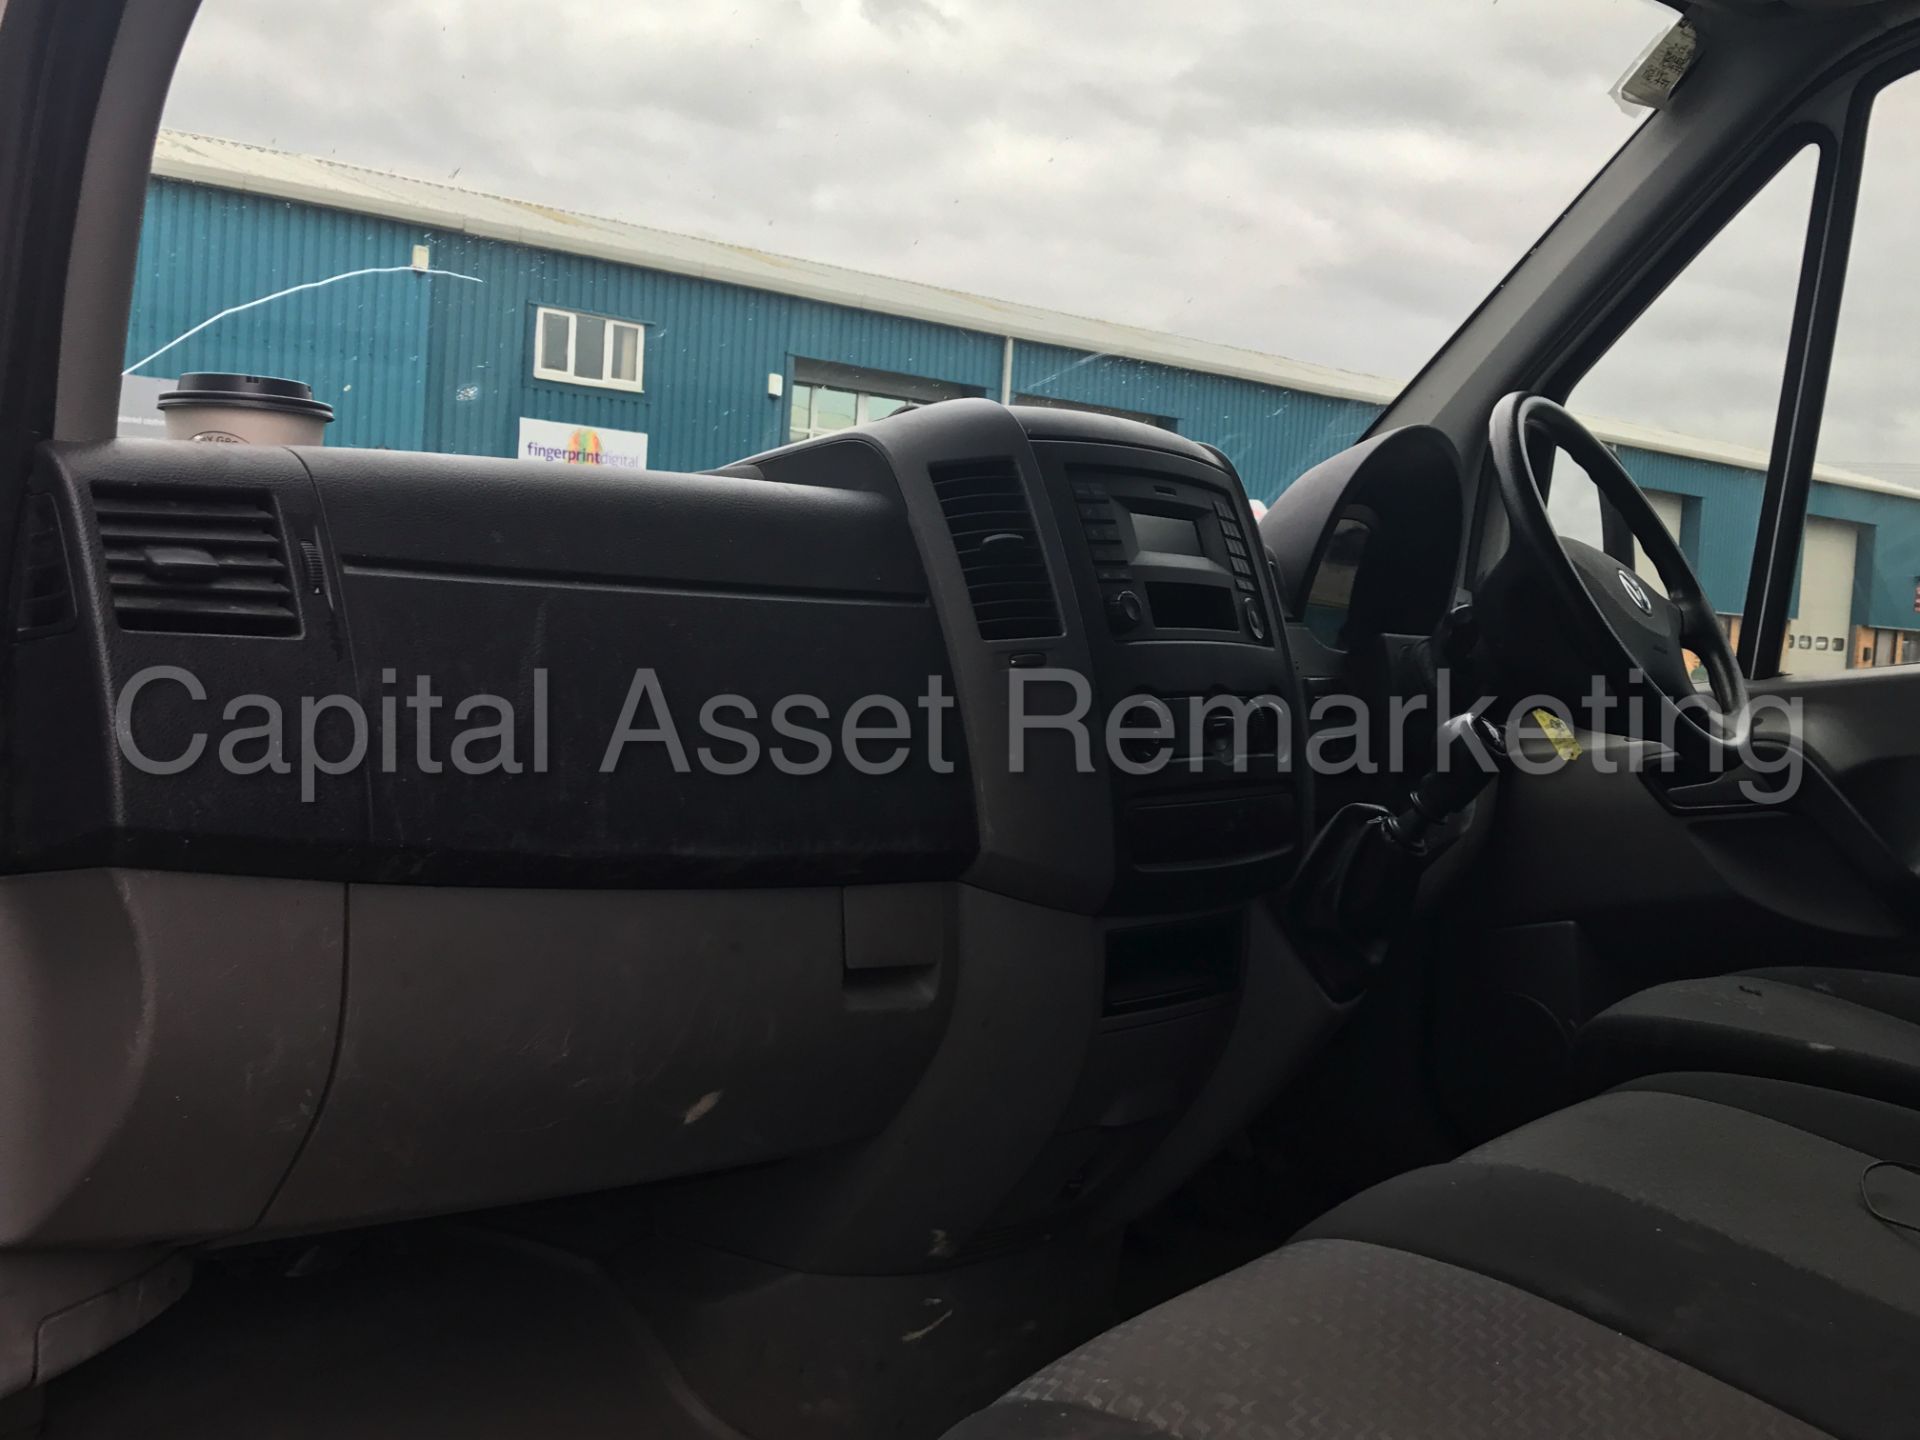 VOLKSWAGEN CRAFTER CR35 'MWB HI-ROOF' (2014) '2.0 TDI - 109 PS - 6 SPEED' *1 COMPANY OWNER FROM NEW* - Image 16 of 19